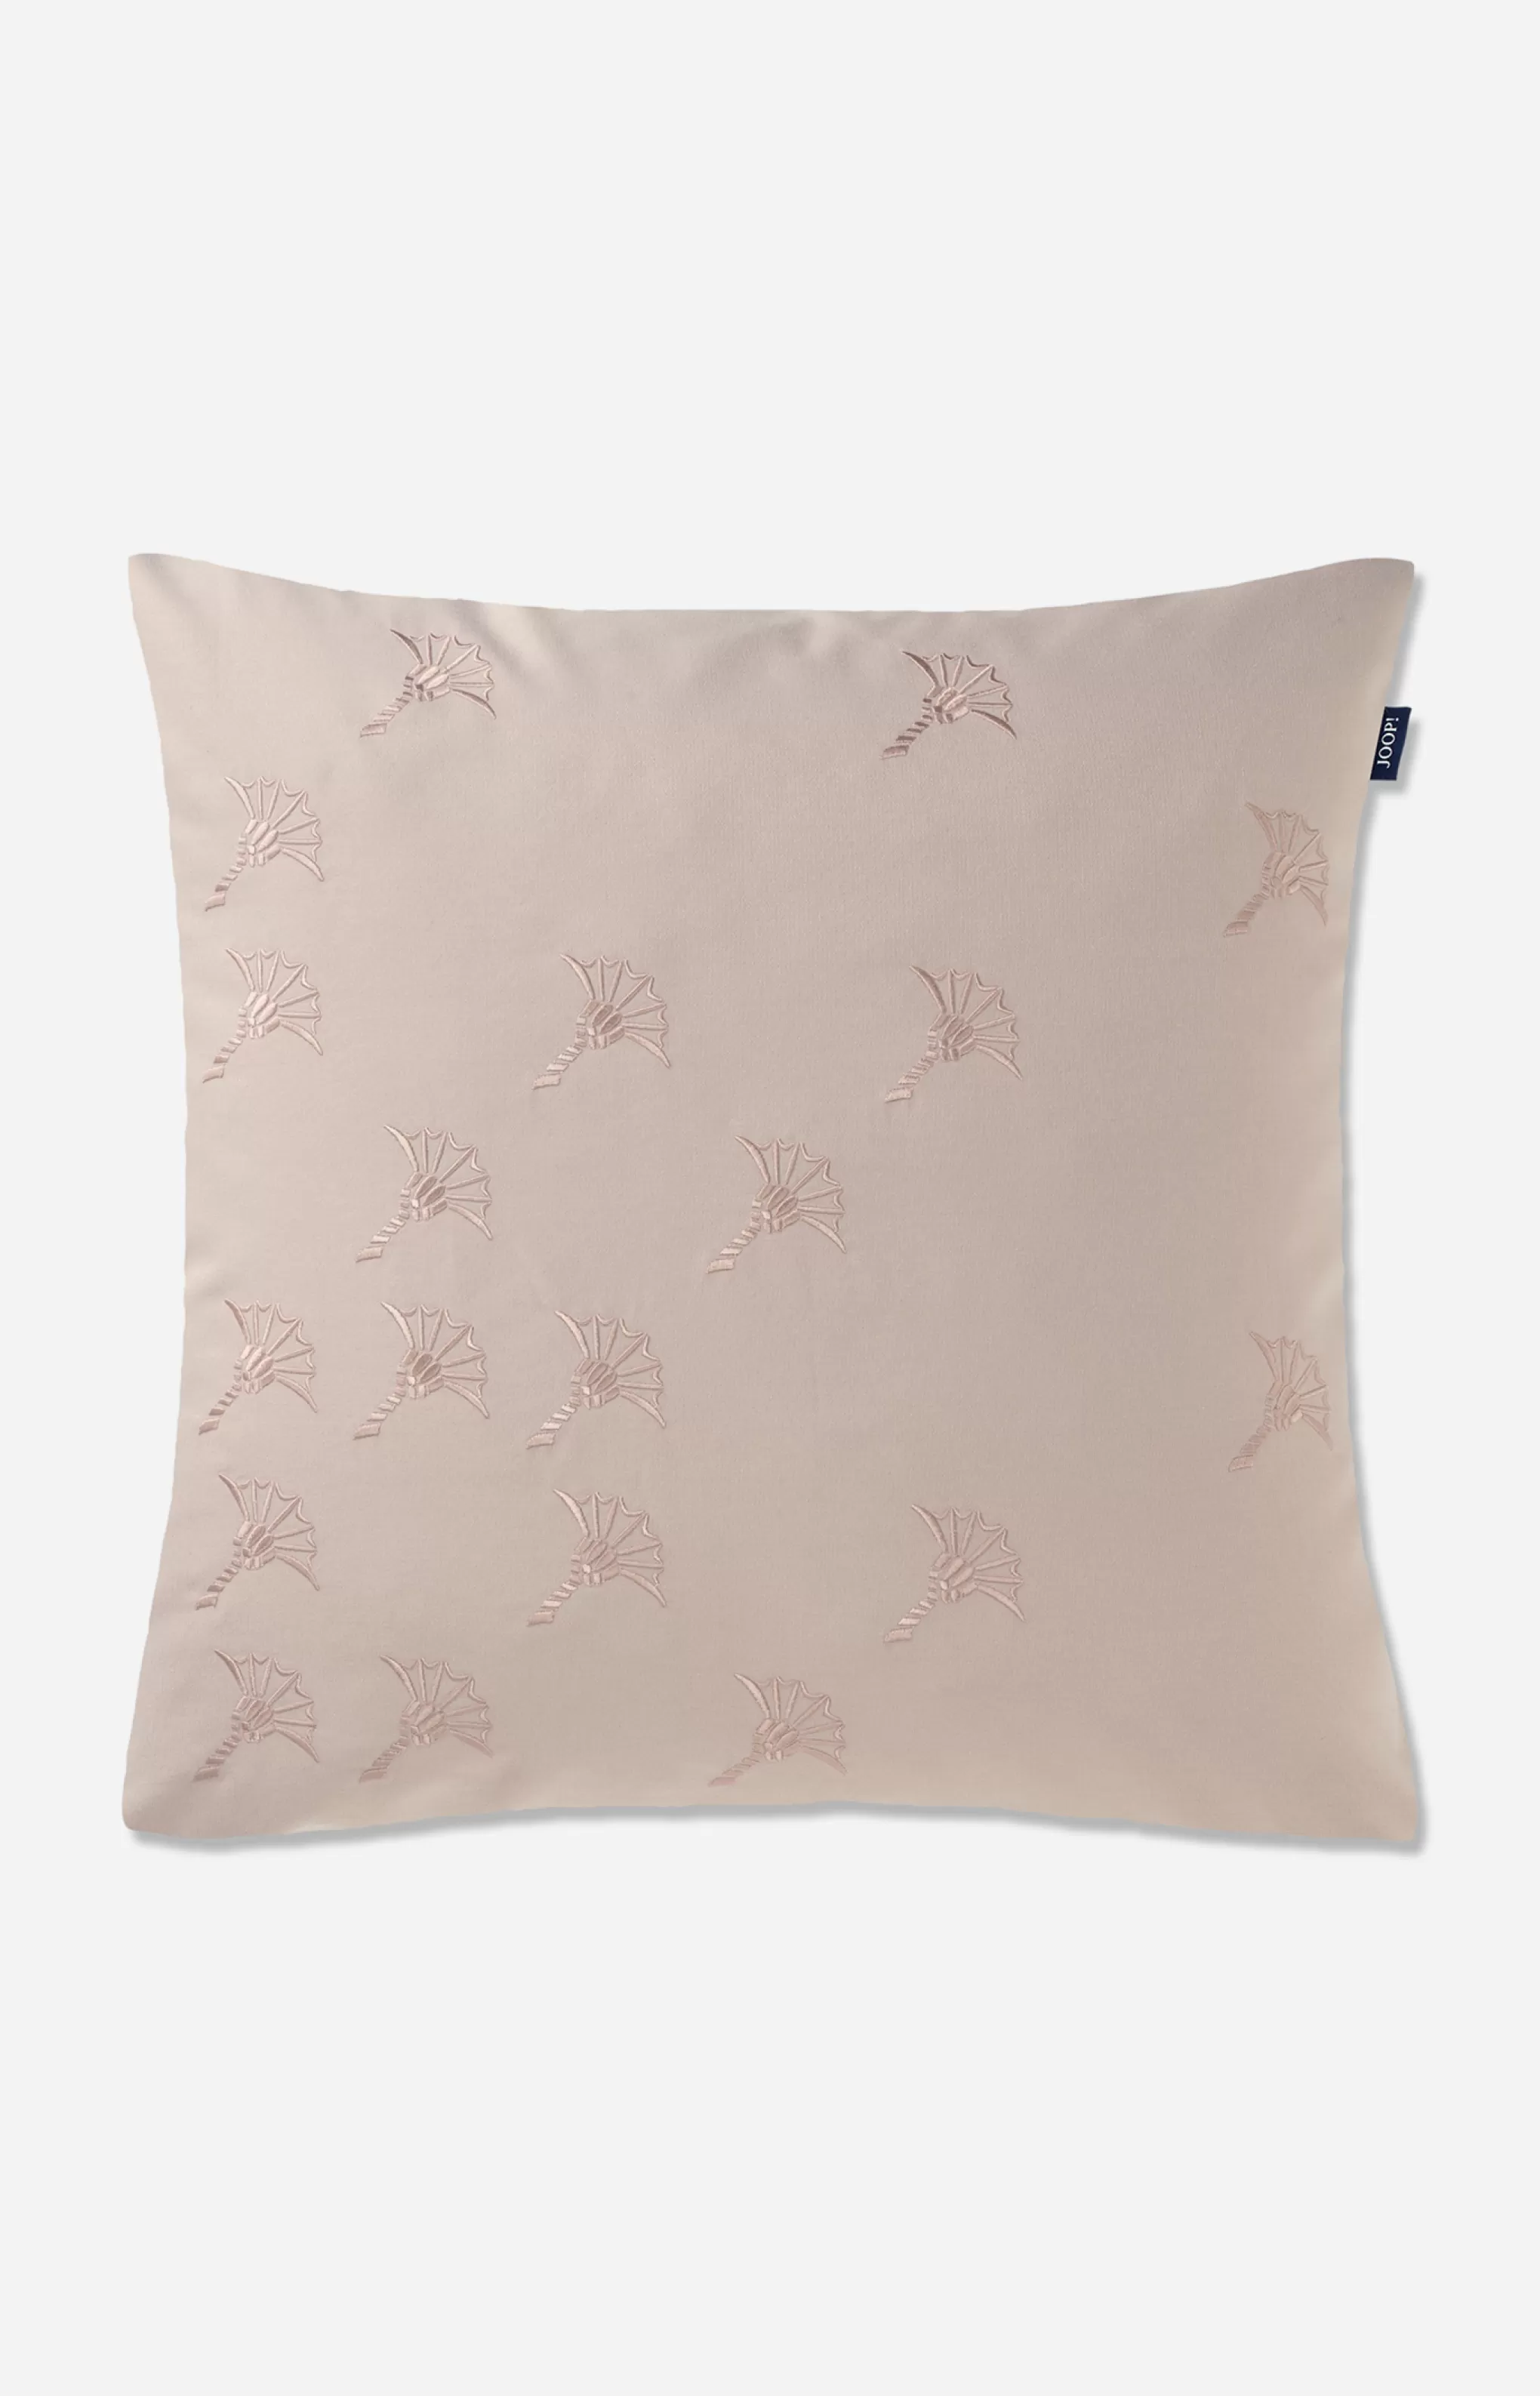 Decorative Cushions | Discover Everything*JOOP Decorative Cushions | Discover Everything ! FADED CORNFLOWER Decorative Cushion Cover in